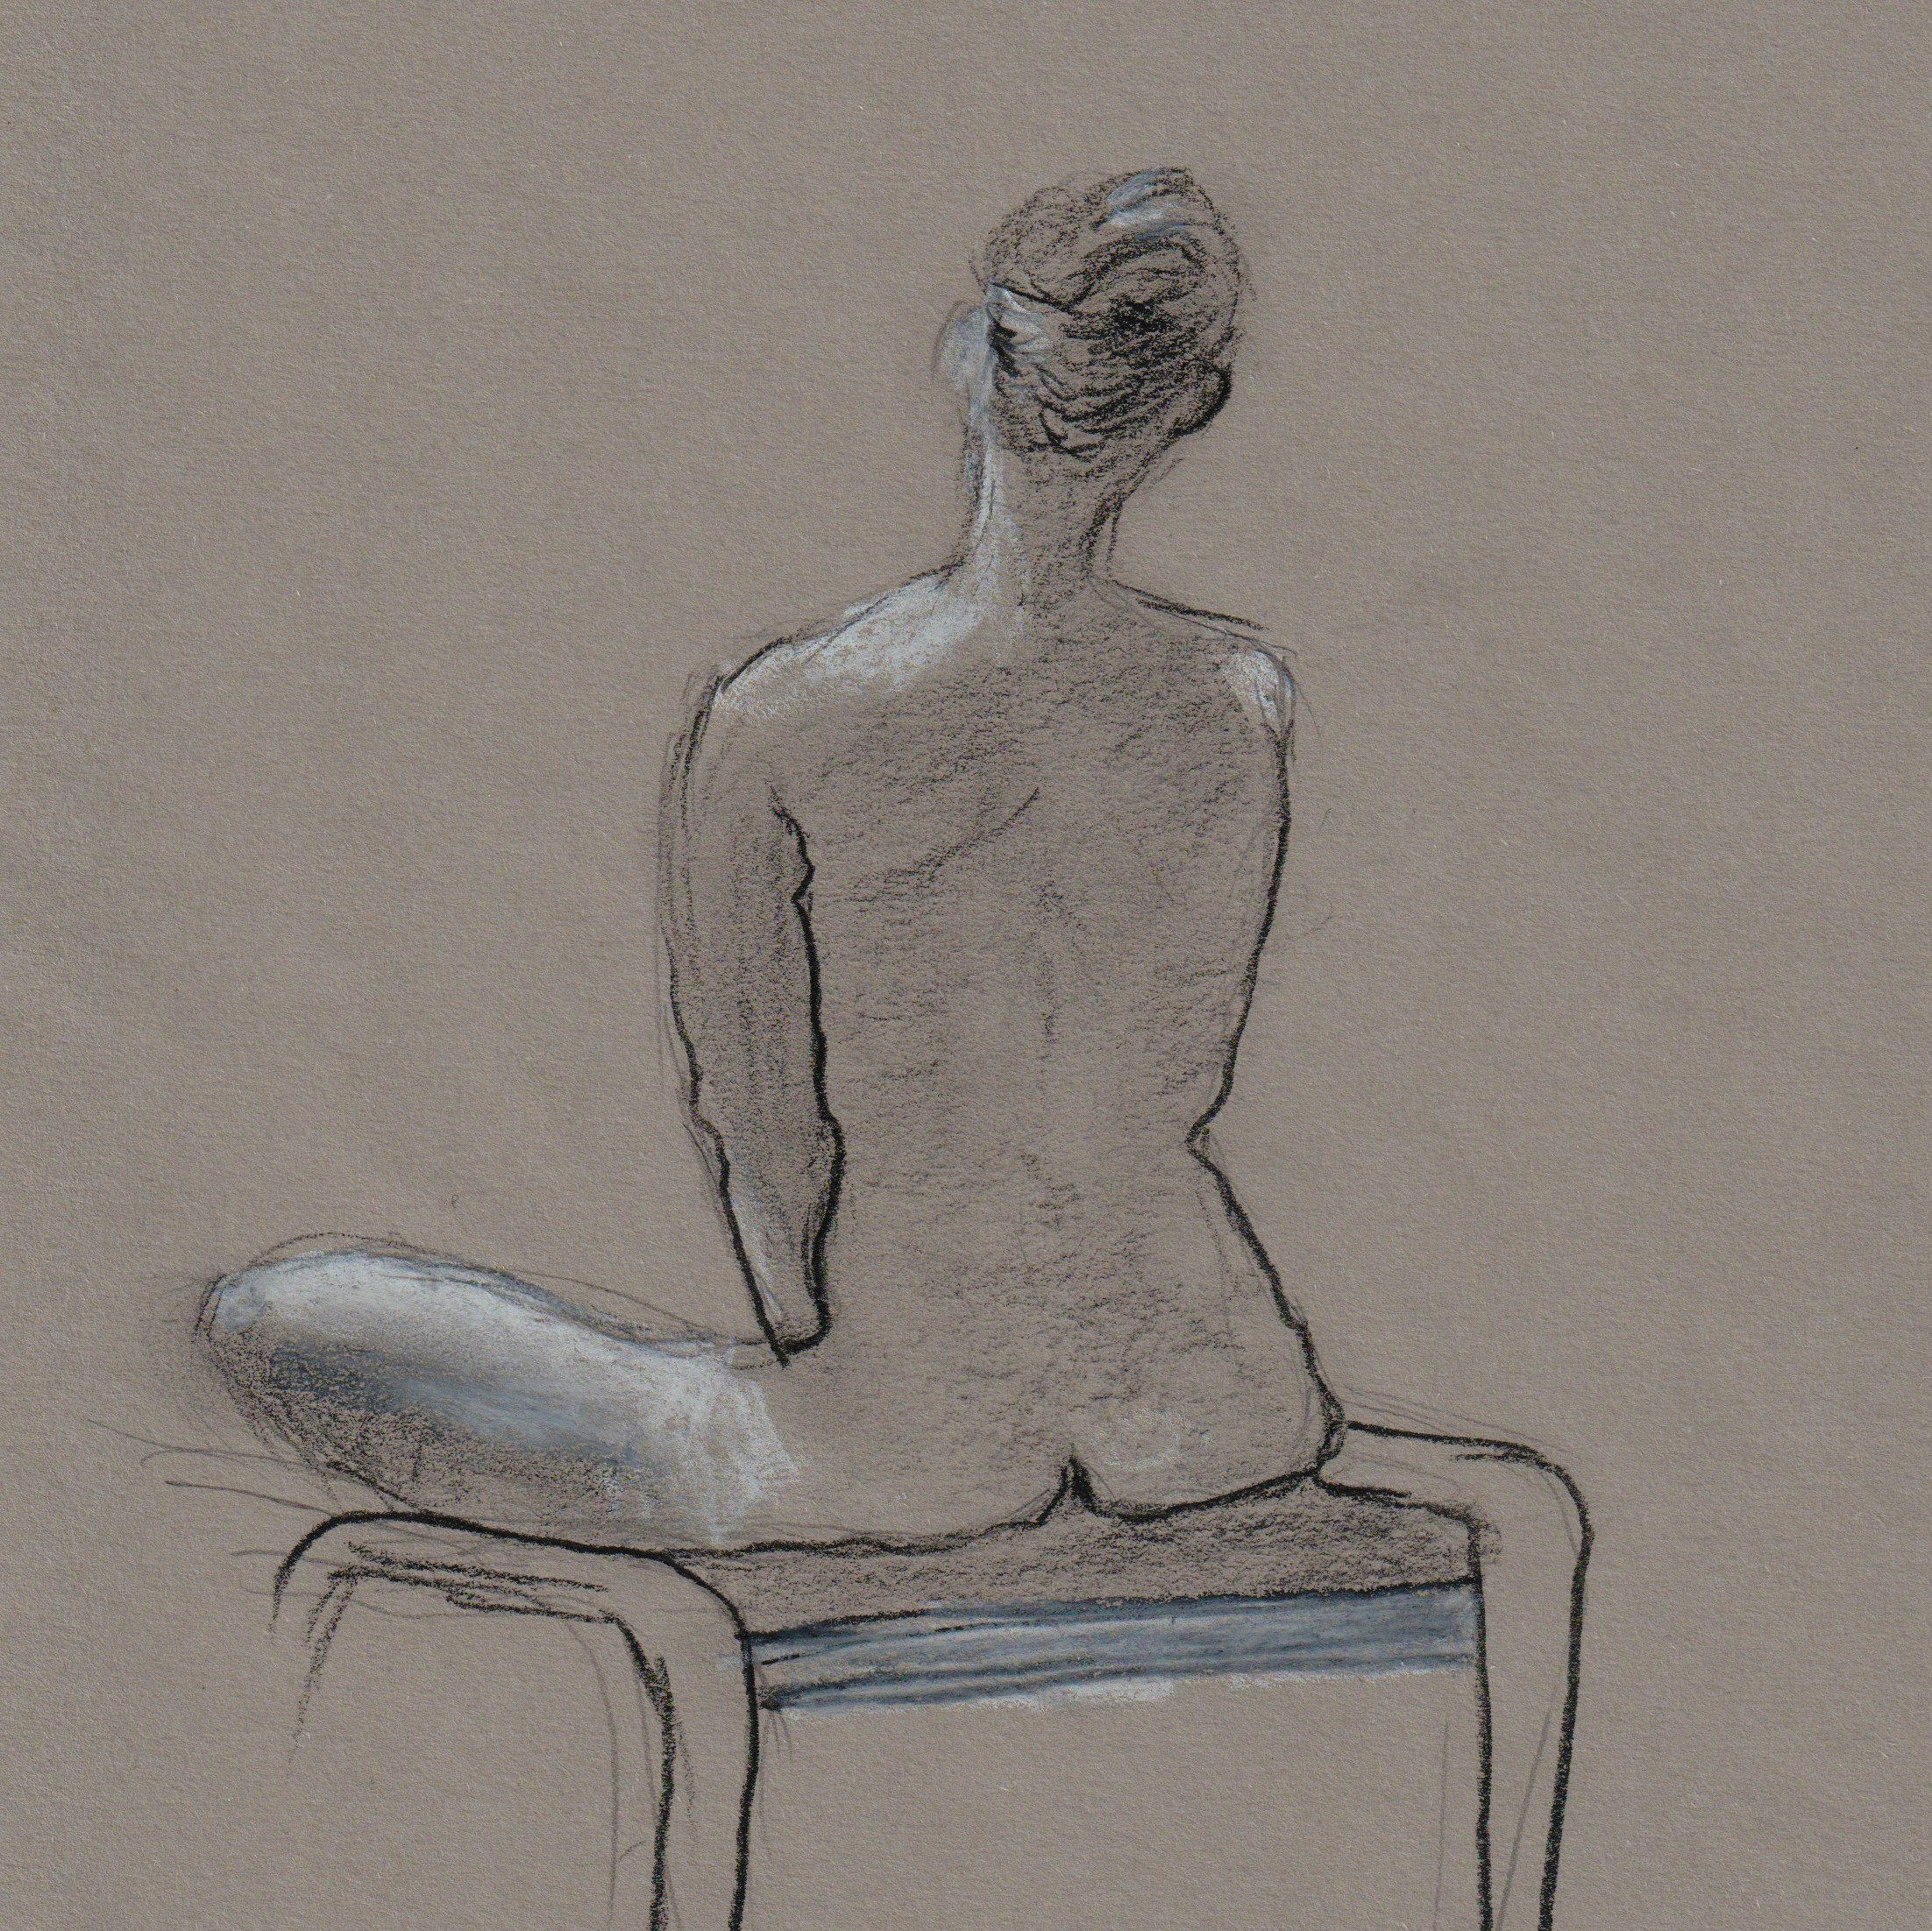 Life drawing2. Coloured pencil on paper. lorena.